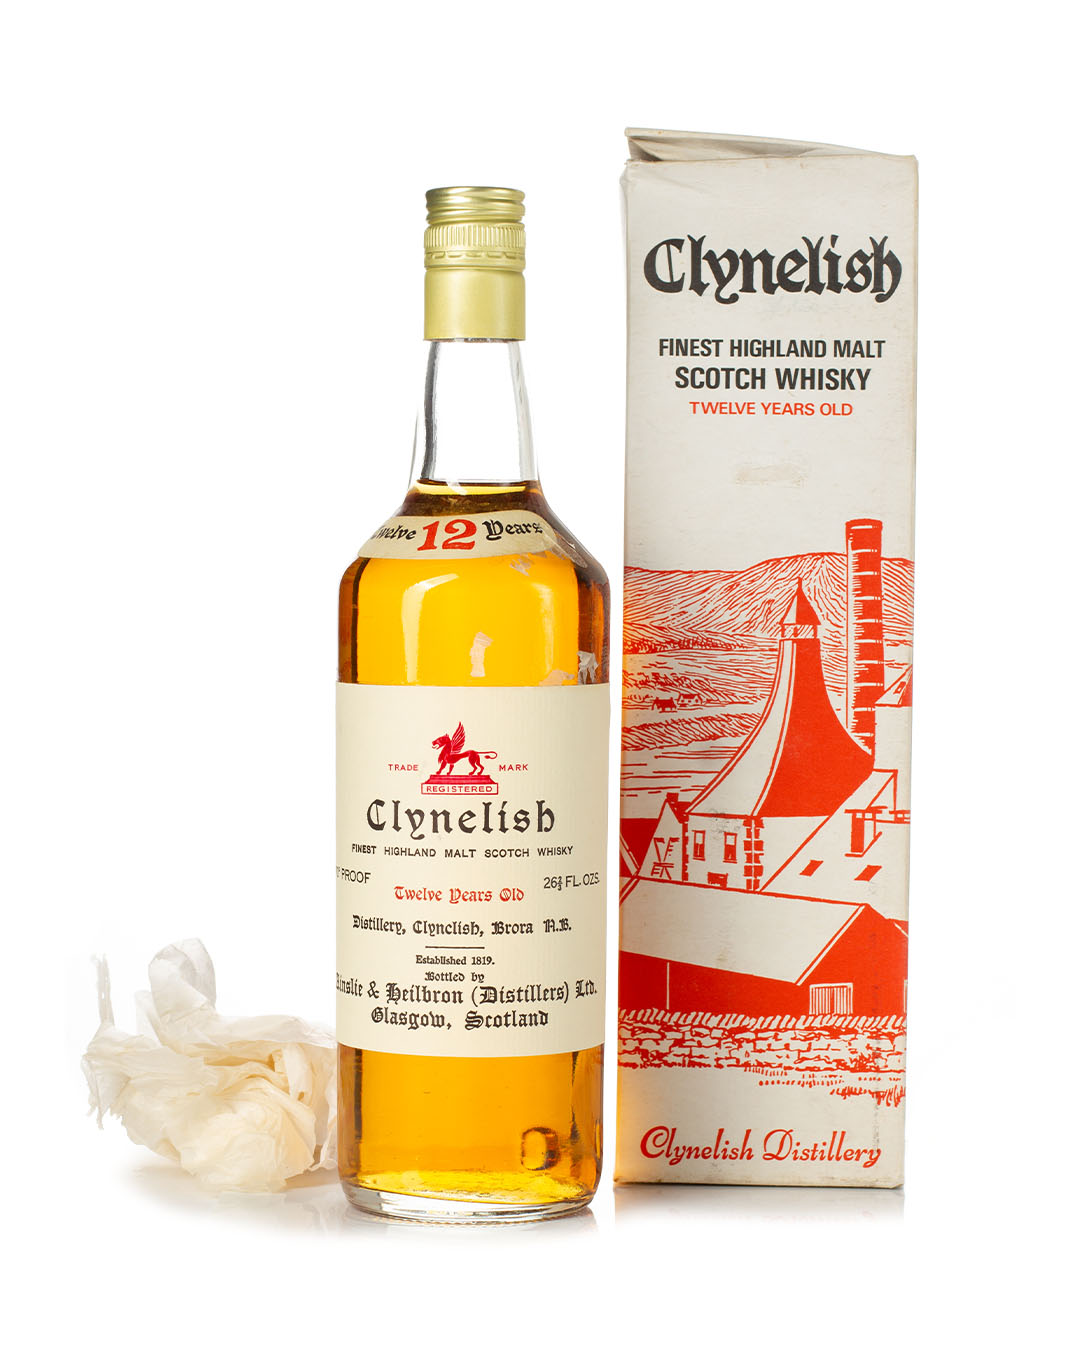 Clynelish 12 year old 70 proof Ainslie & Heilbrown